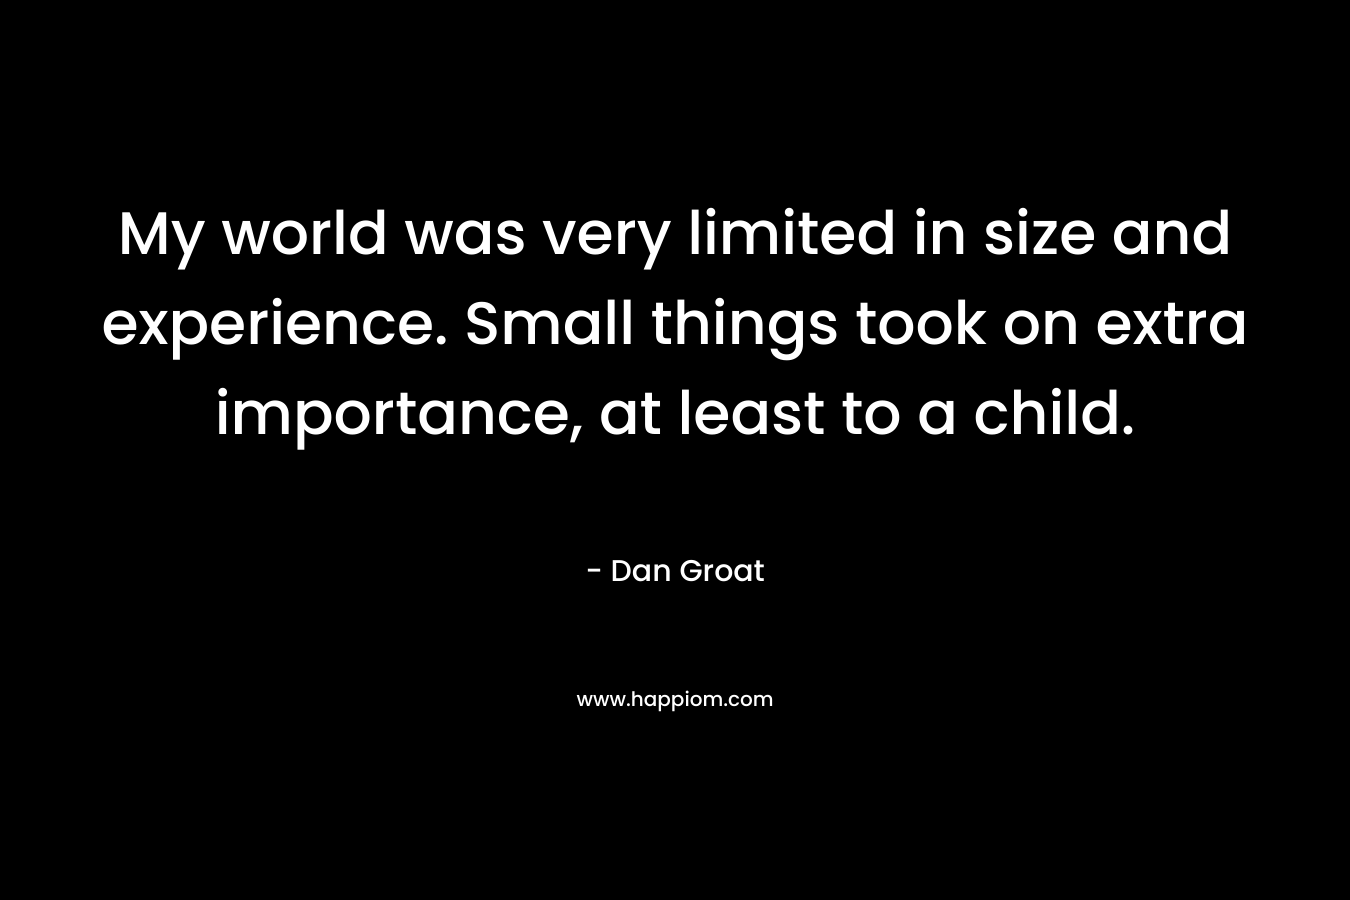 My world was very limited in size and experience. Small things took on extra importance, at least to a child. – Dan Groat